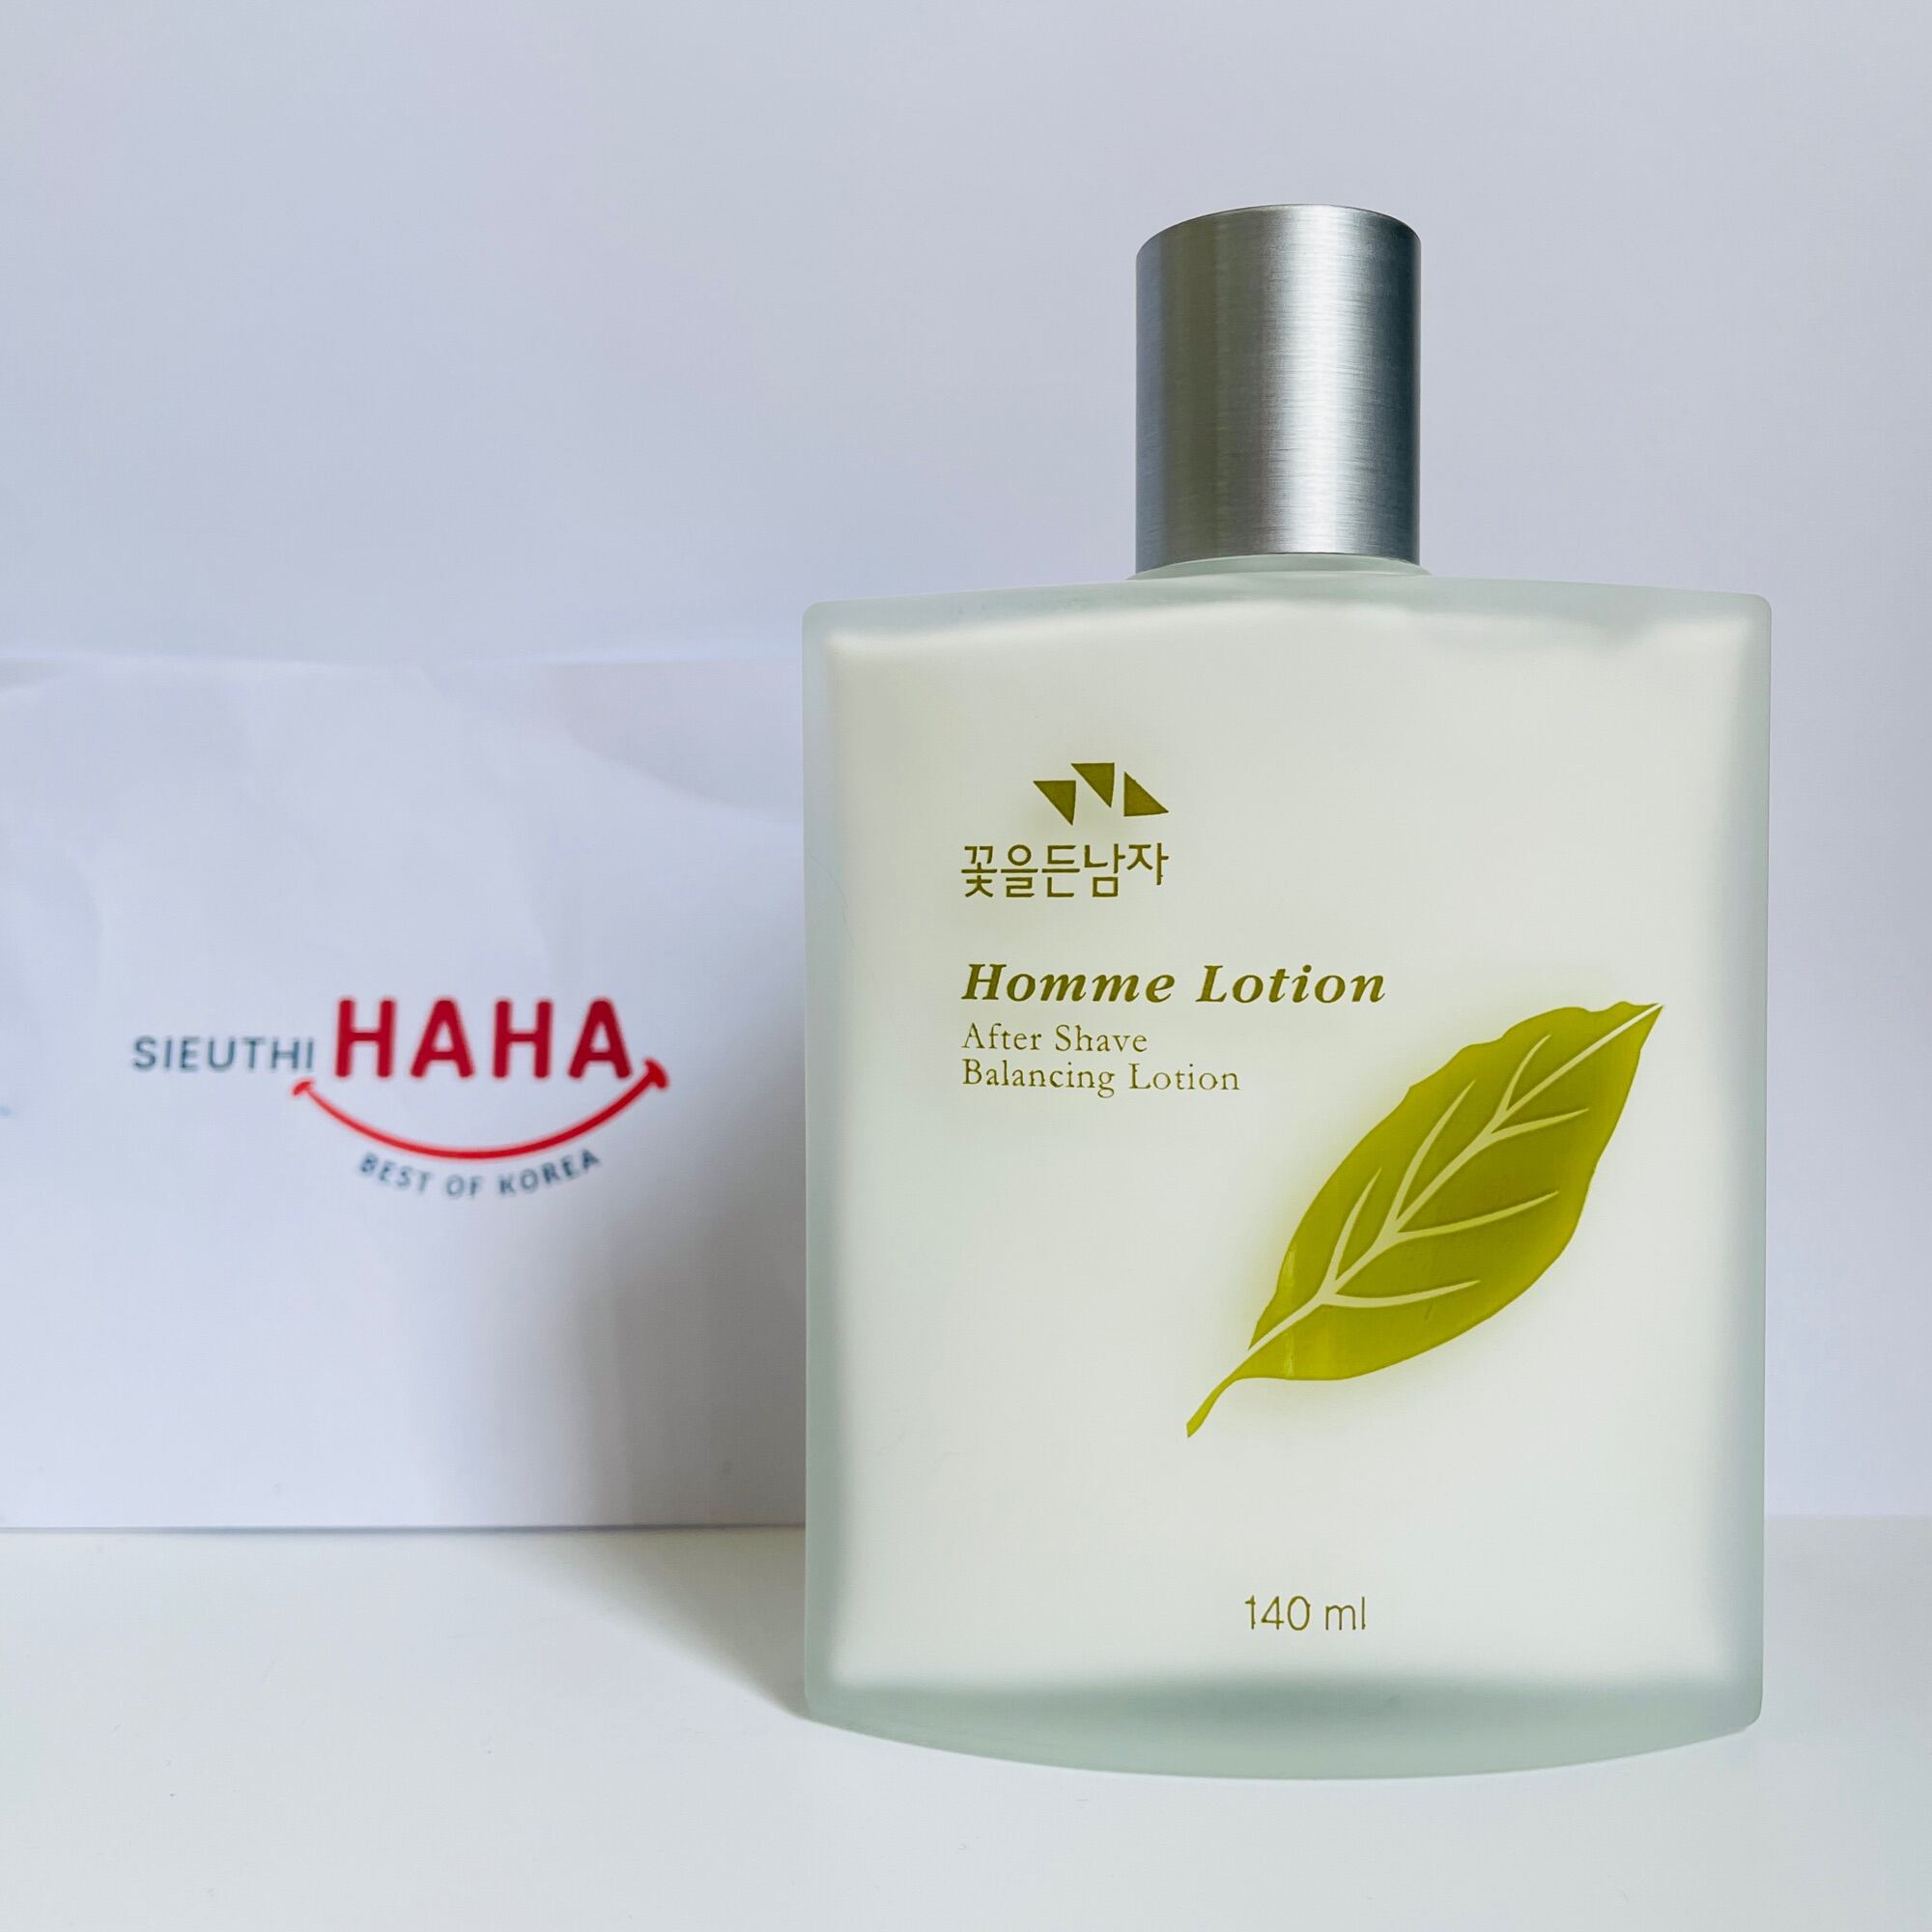 Lotion dưỡng da cho nam HOMME LOTION After Shave Balancing Lotion 140ml